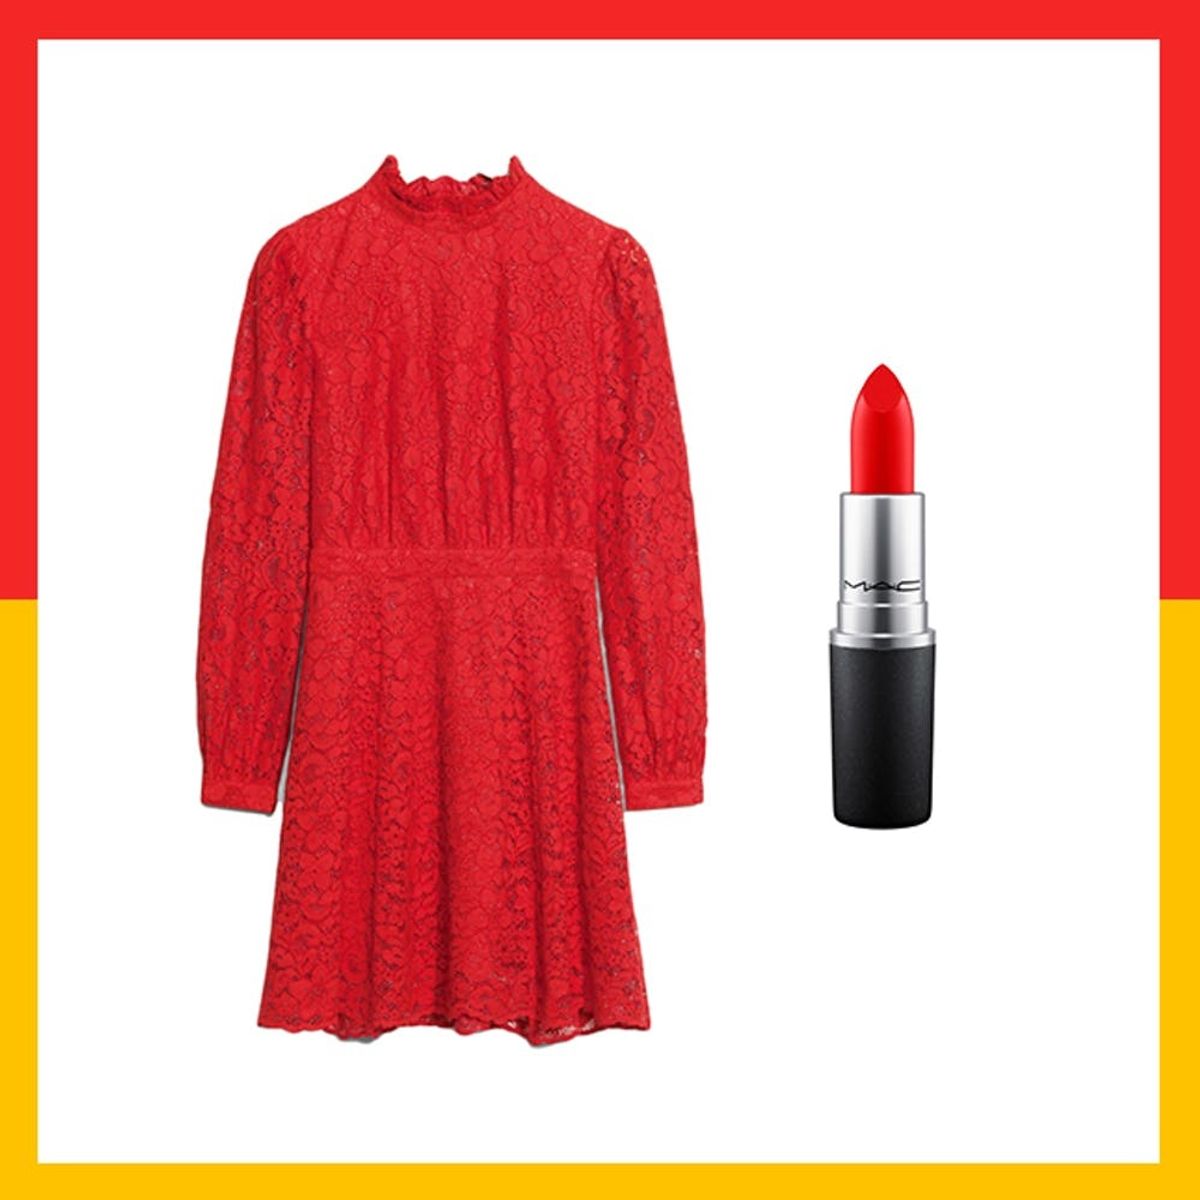 The Definitive Guide to Pairing Your Holiday Party Dress With the Perfect Lipstick